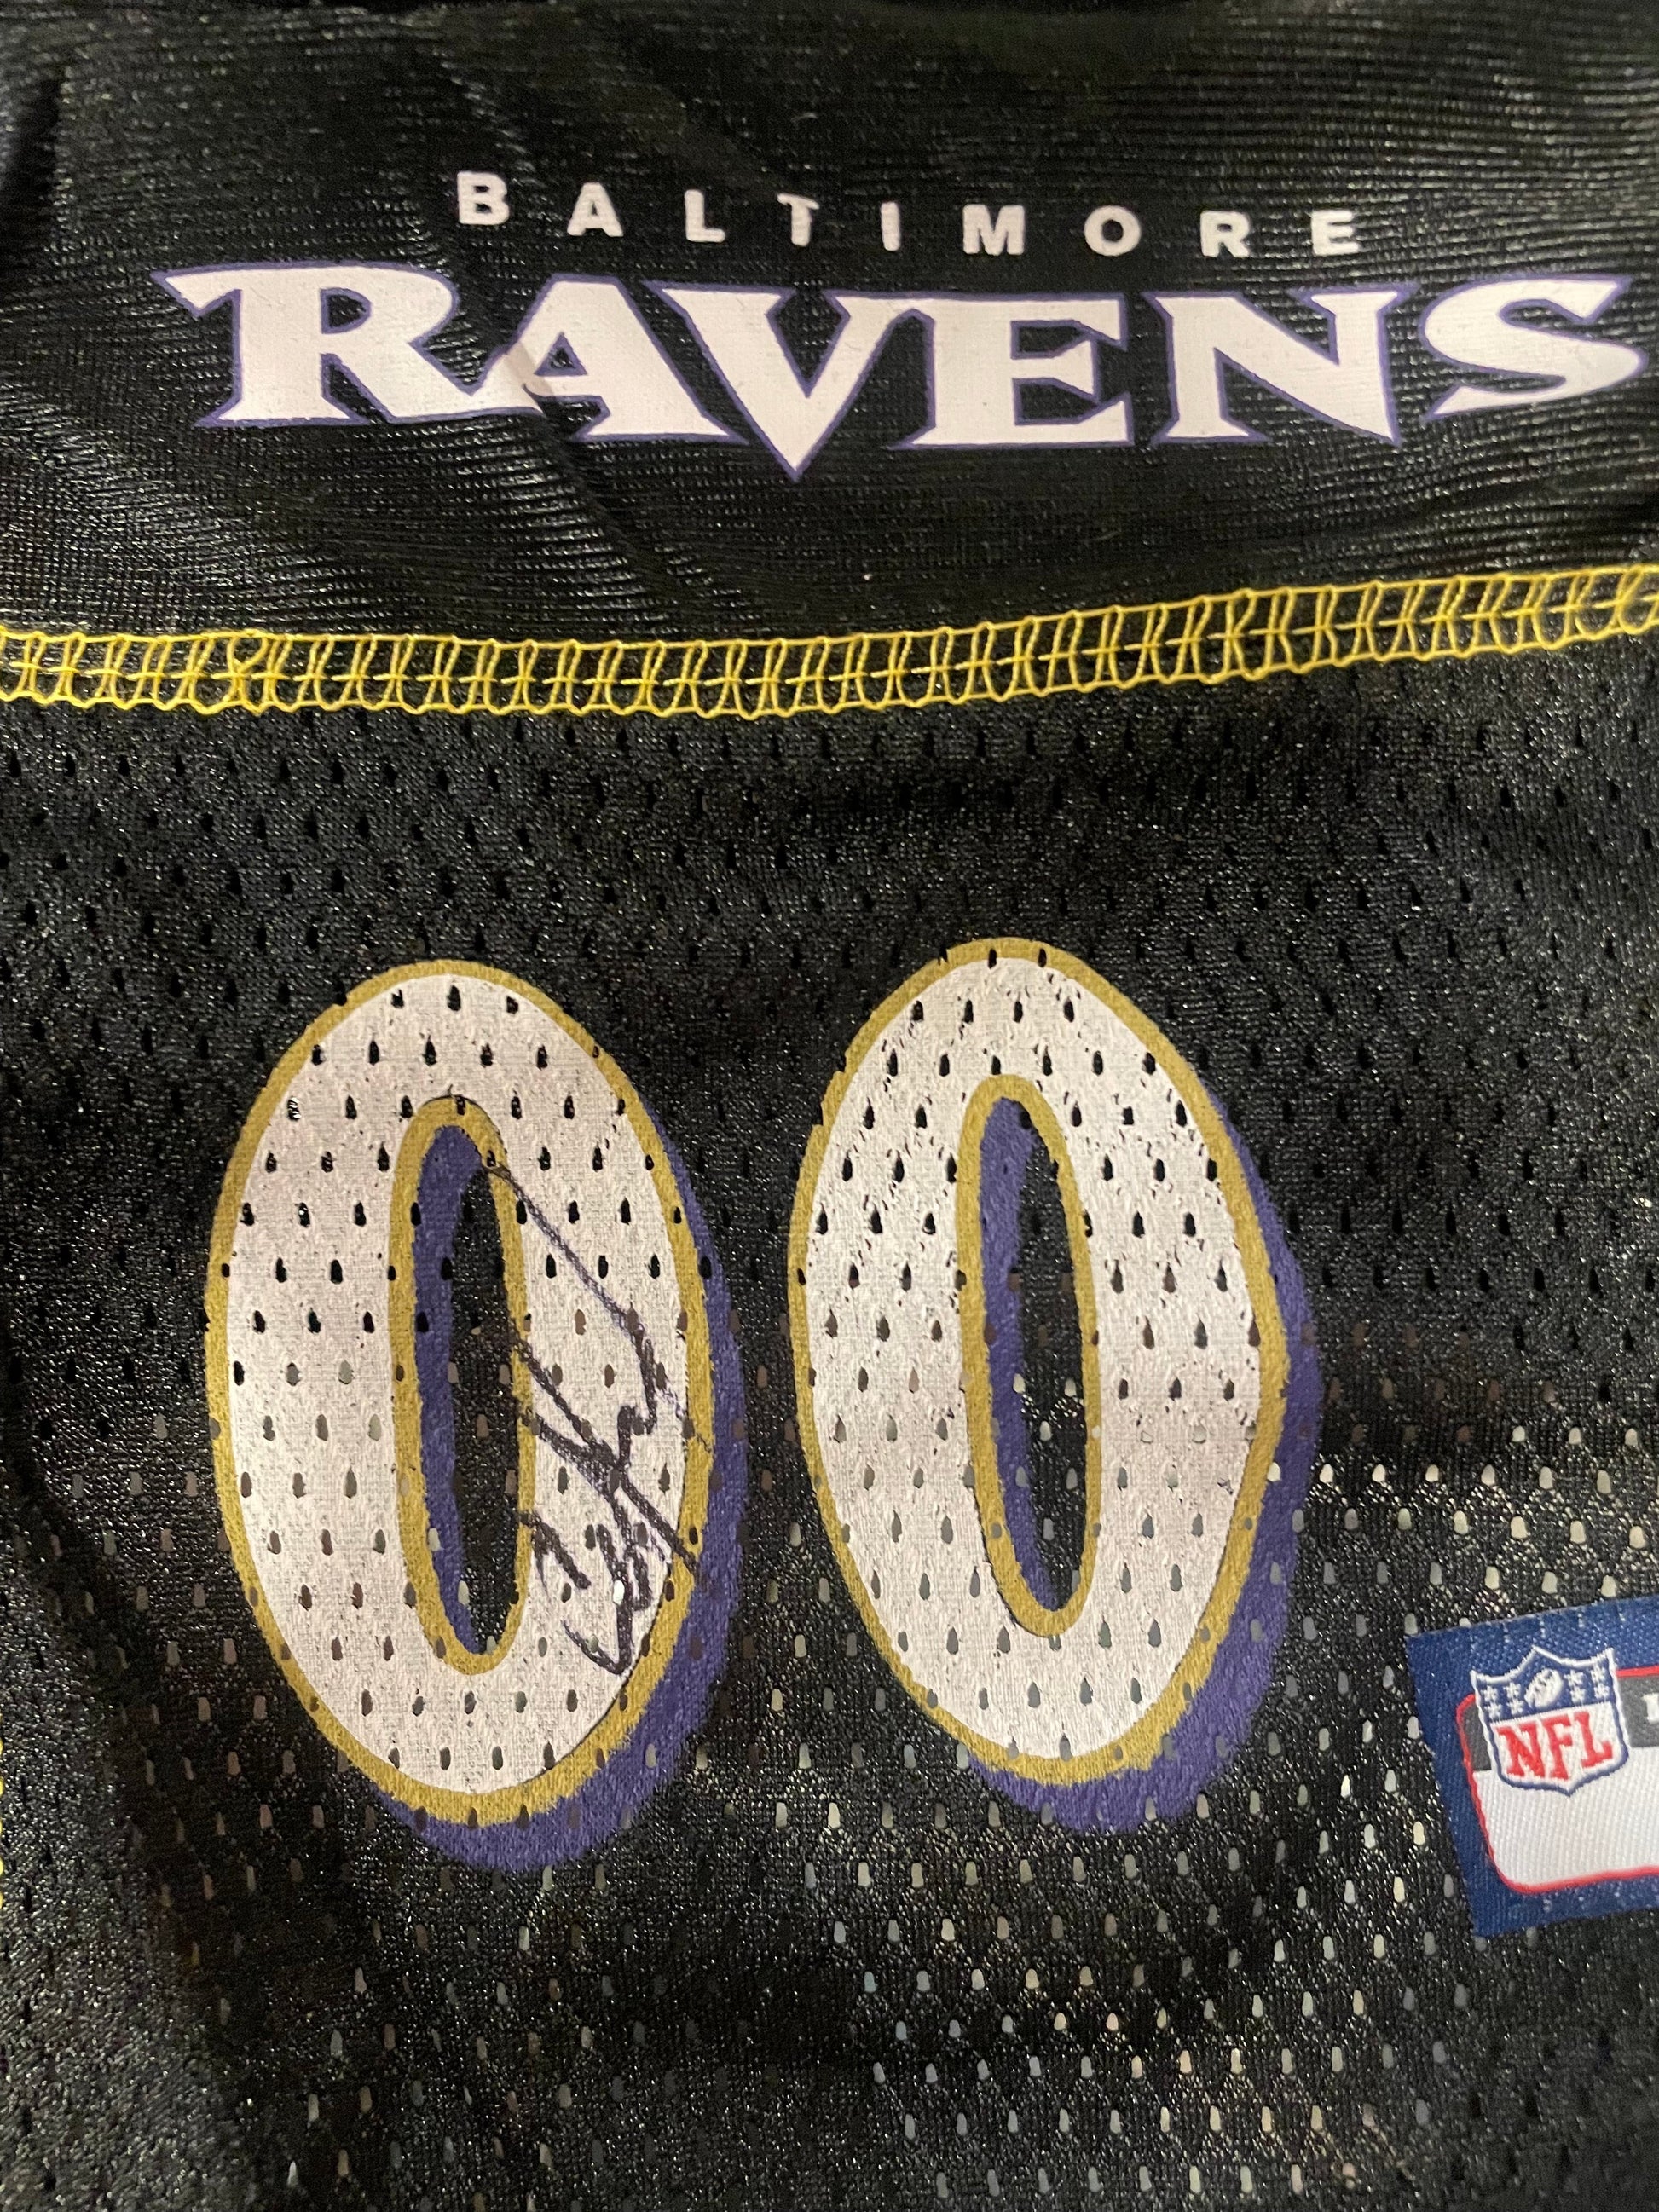 Official NFL Autographed Ed Reed Pet Baltimore Ravens Dog Jersey and Bandana - Ed Reed Foundation